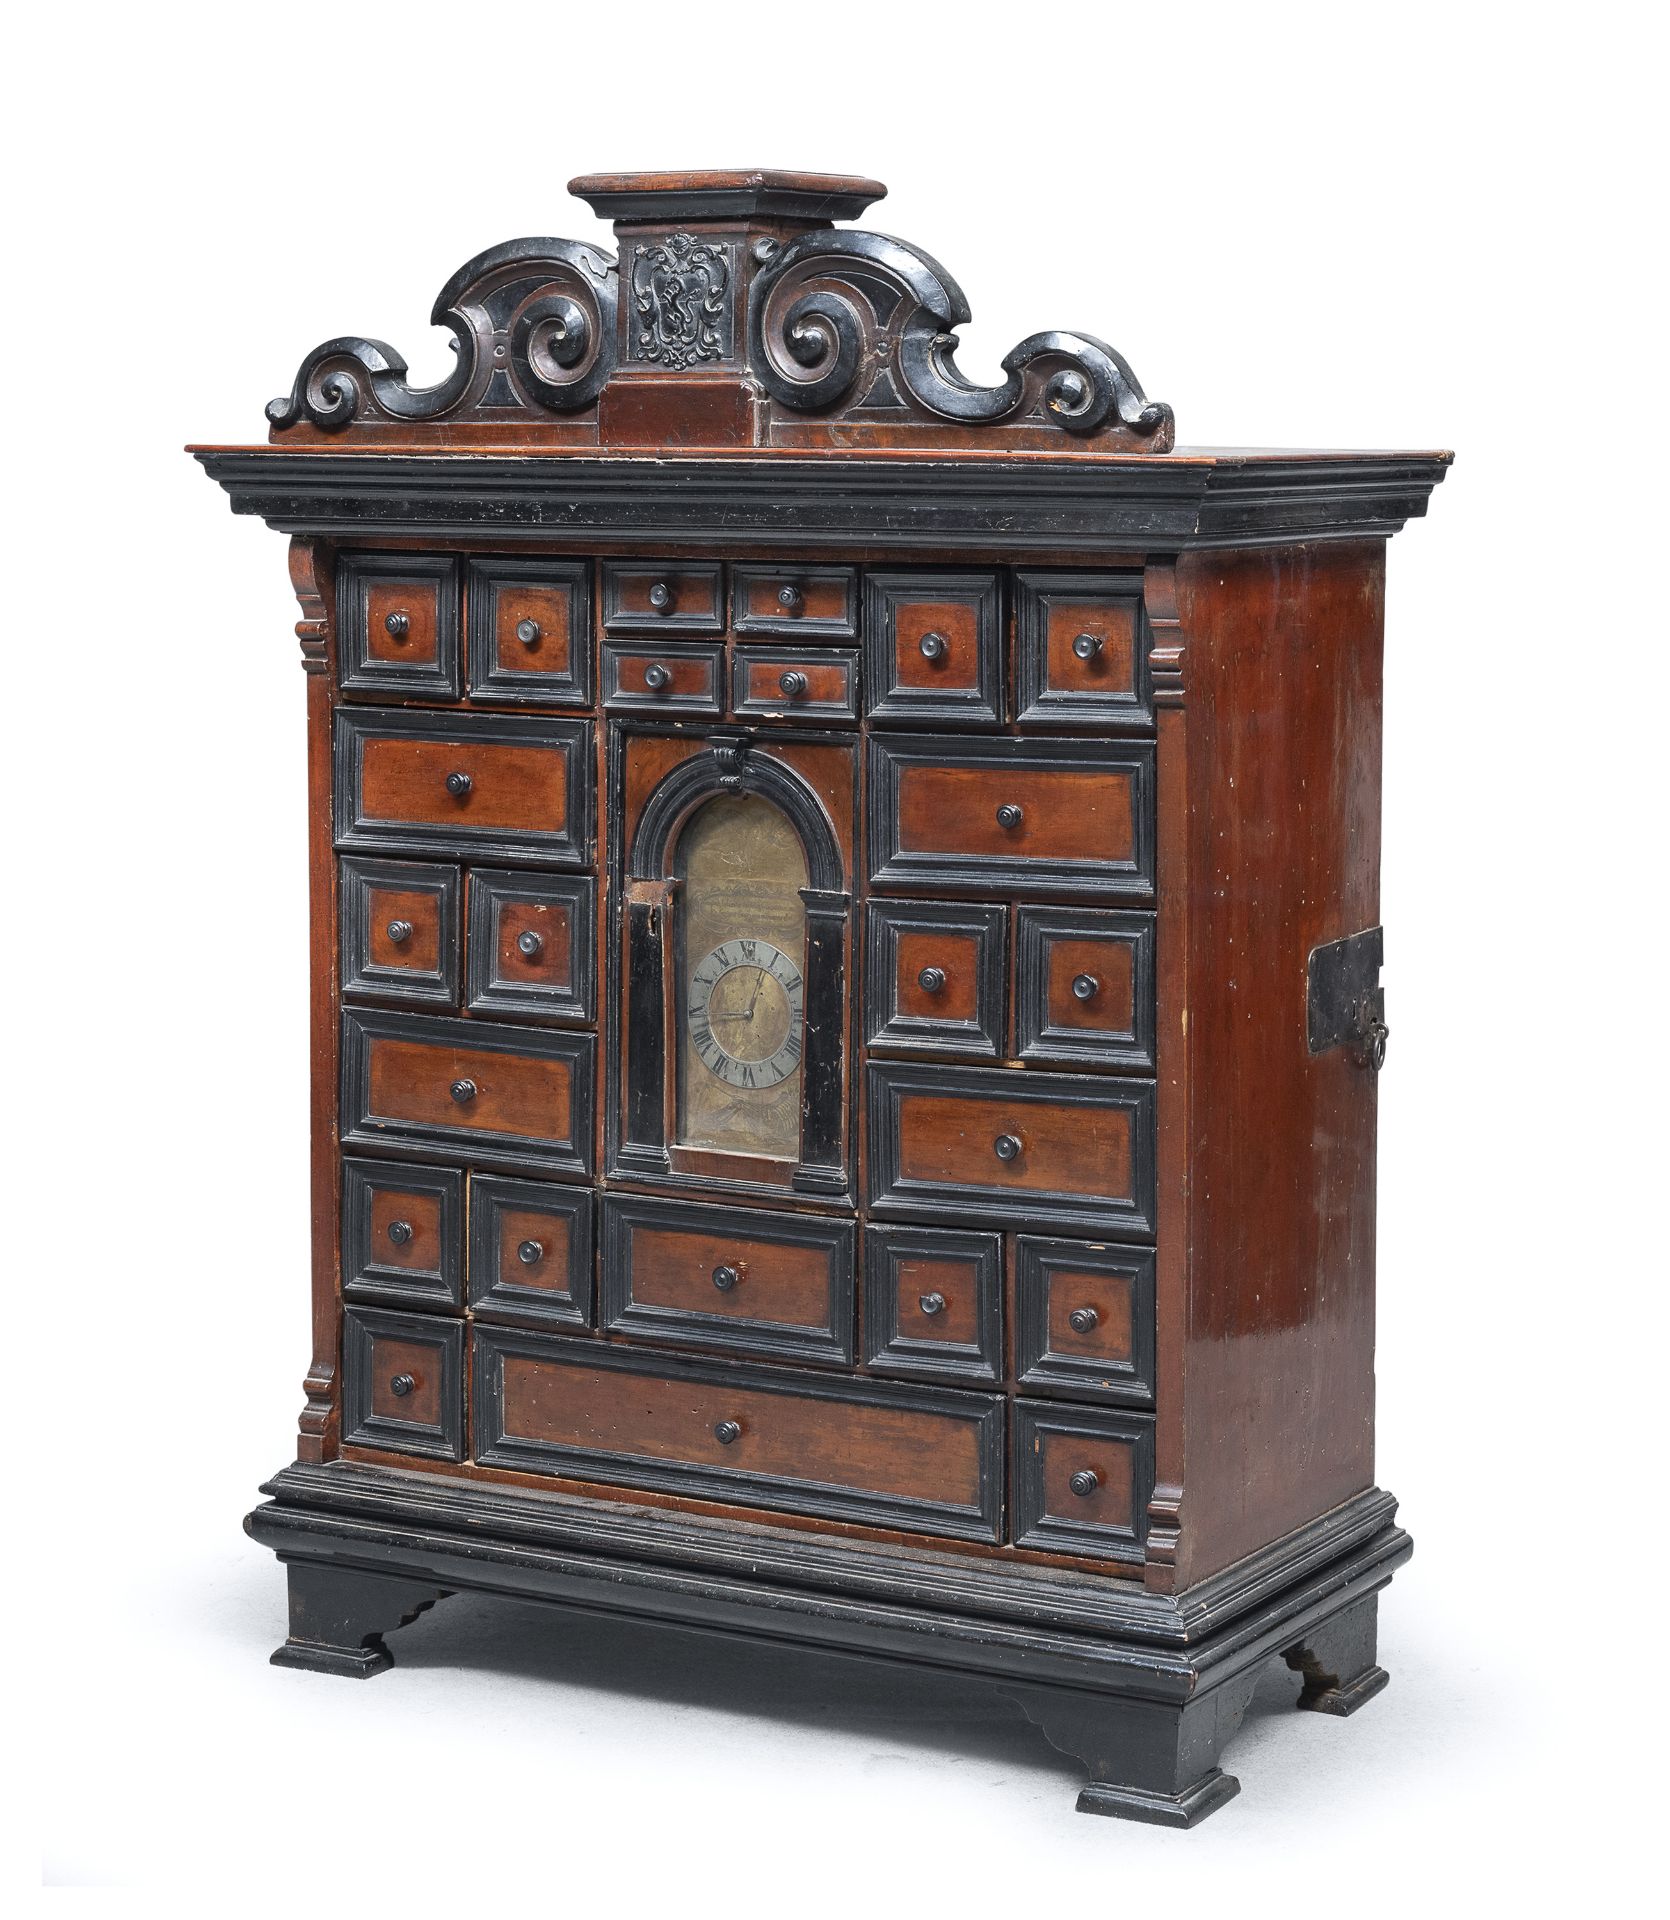 RARE WALNUT COIN CABINET WITH CLOCK PROBABLY 18TH CENTURY ROME - Image 2 of 3